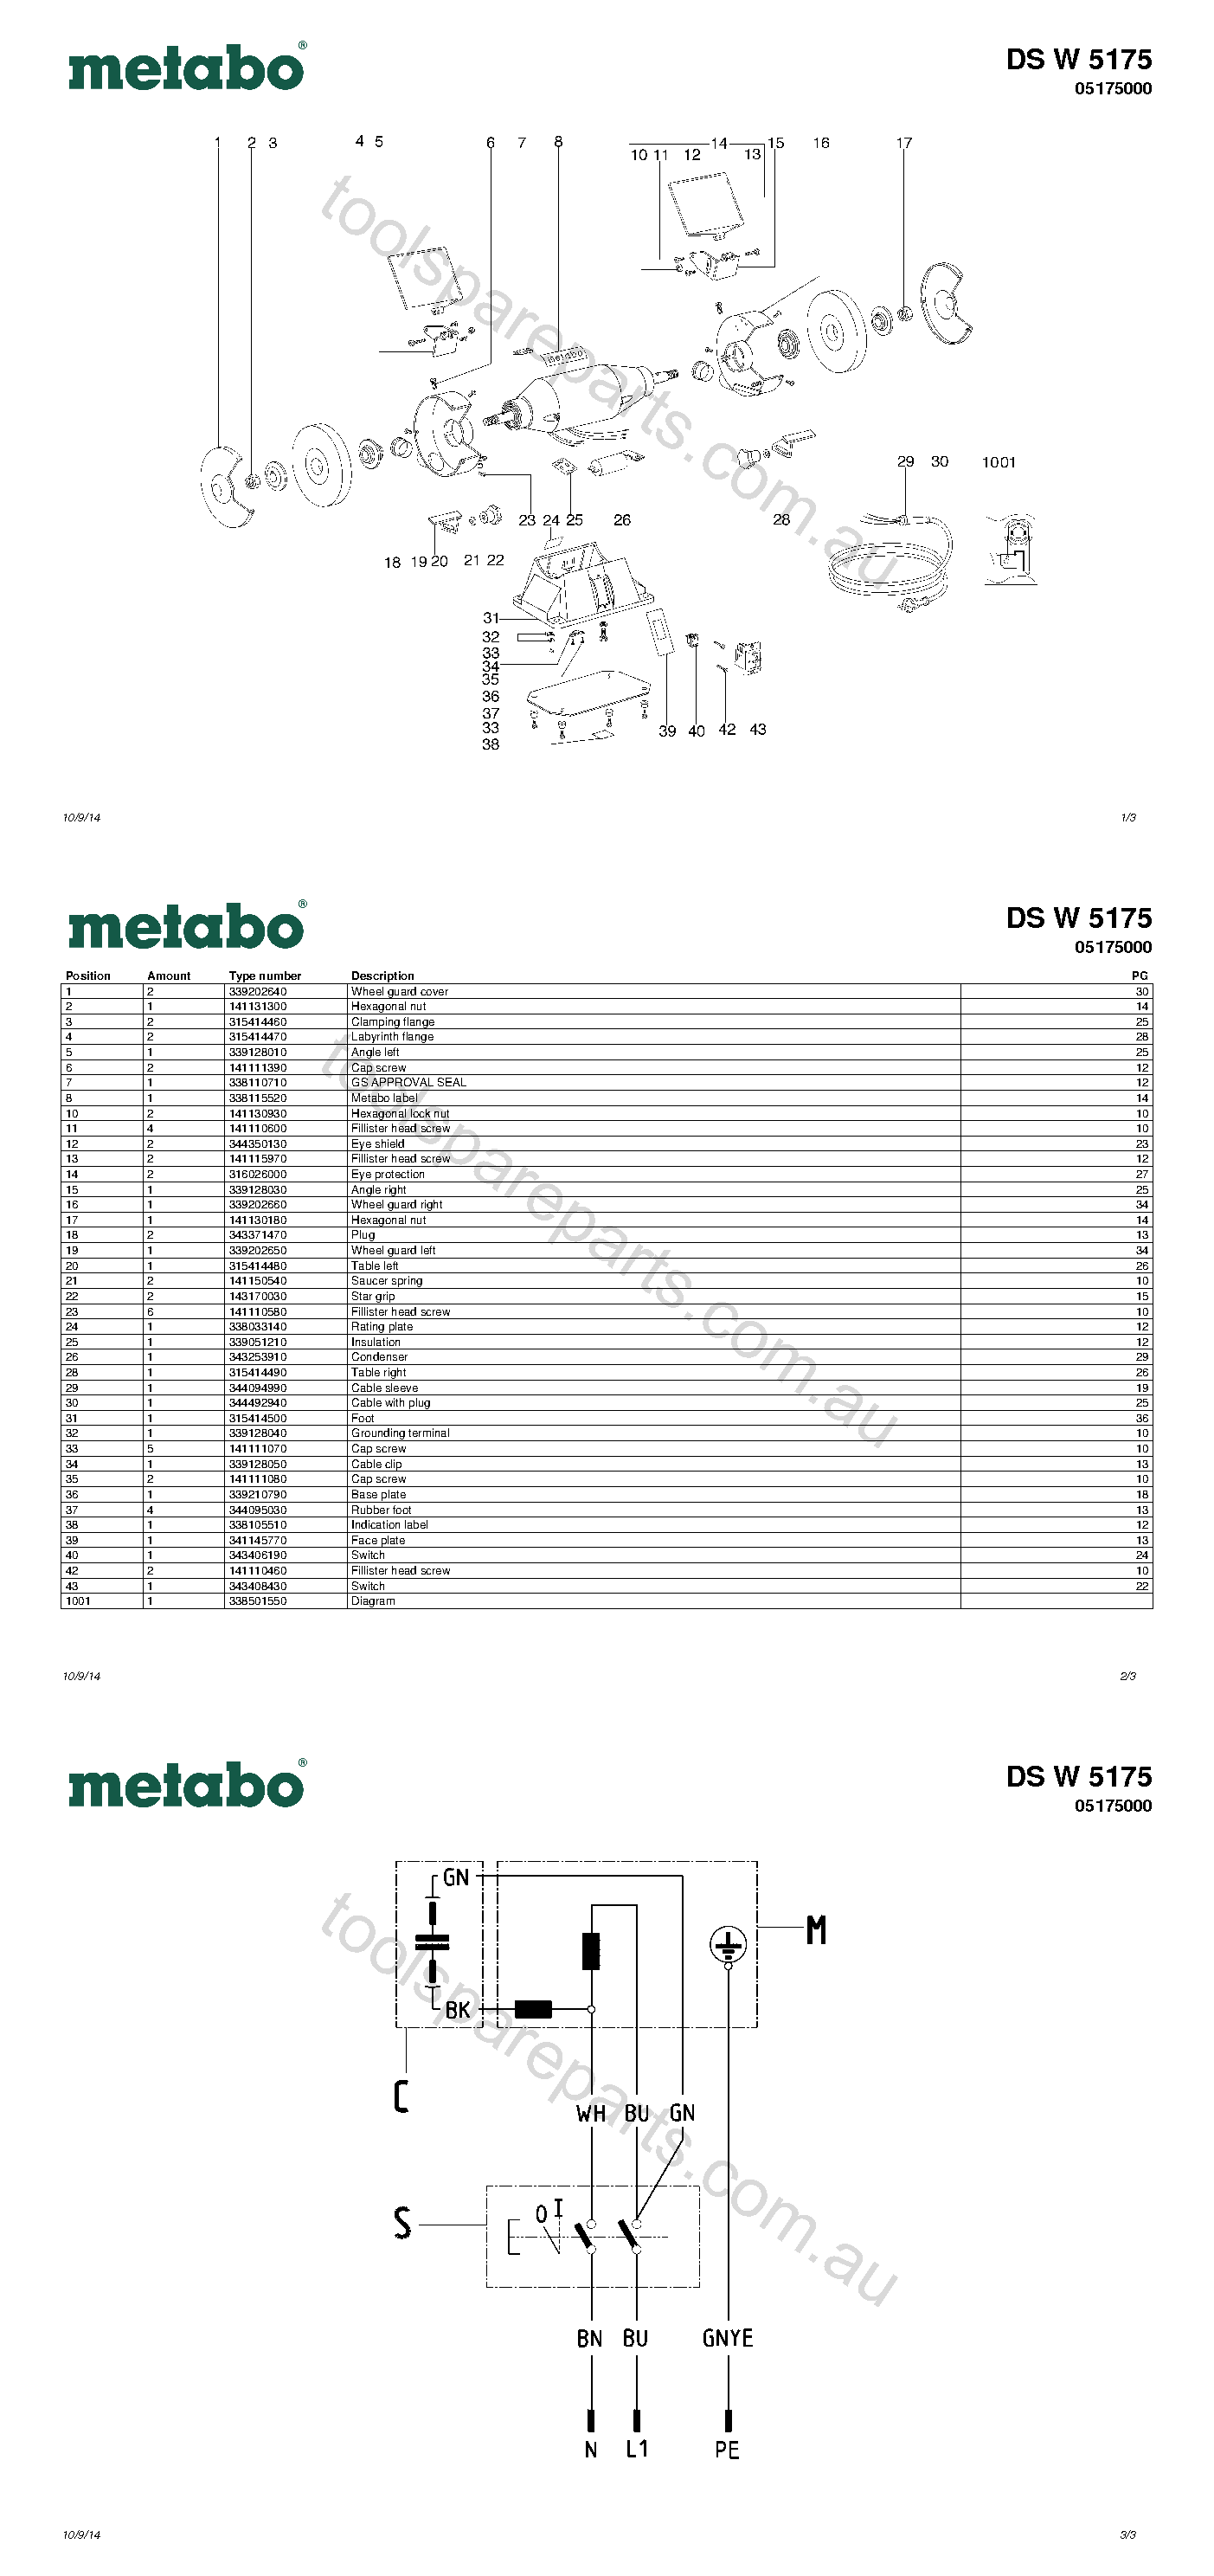 Metabo DS W 5175 05175000  Diagram 1